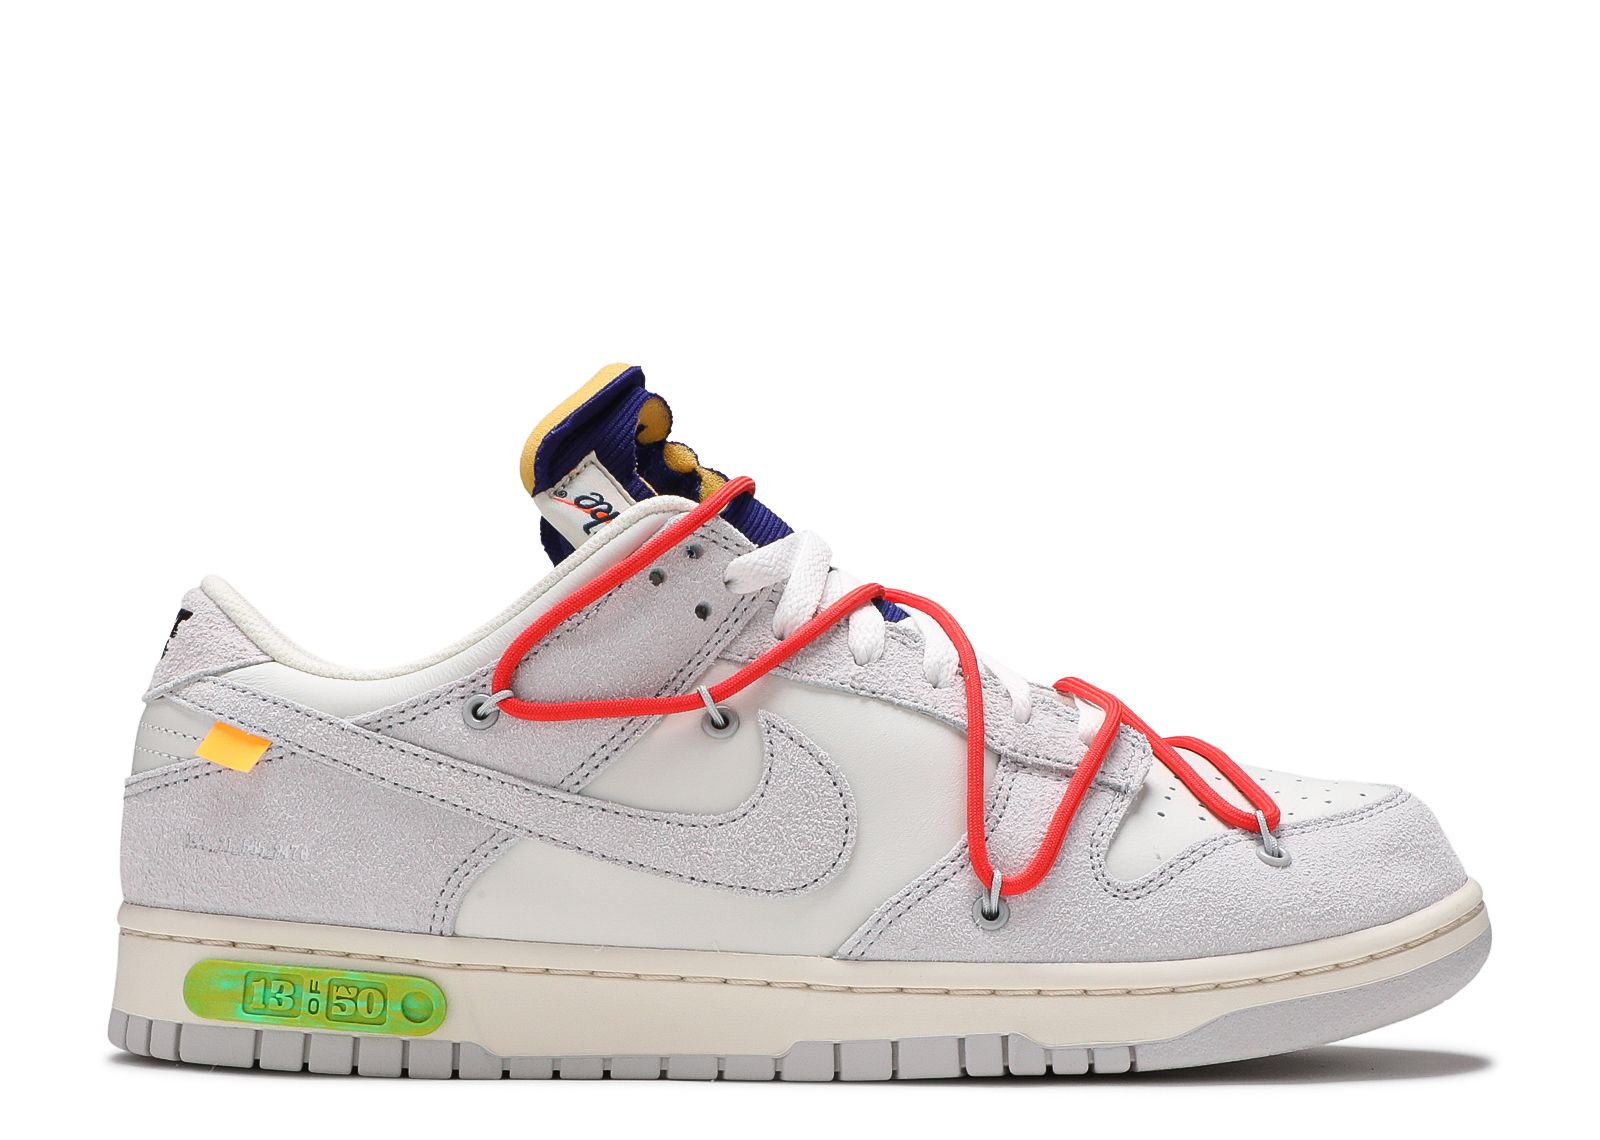 Nike Dunk Low 'Off-White - University Red' Shoes - 9.5